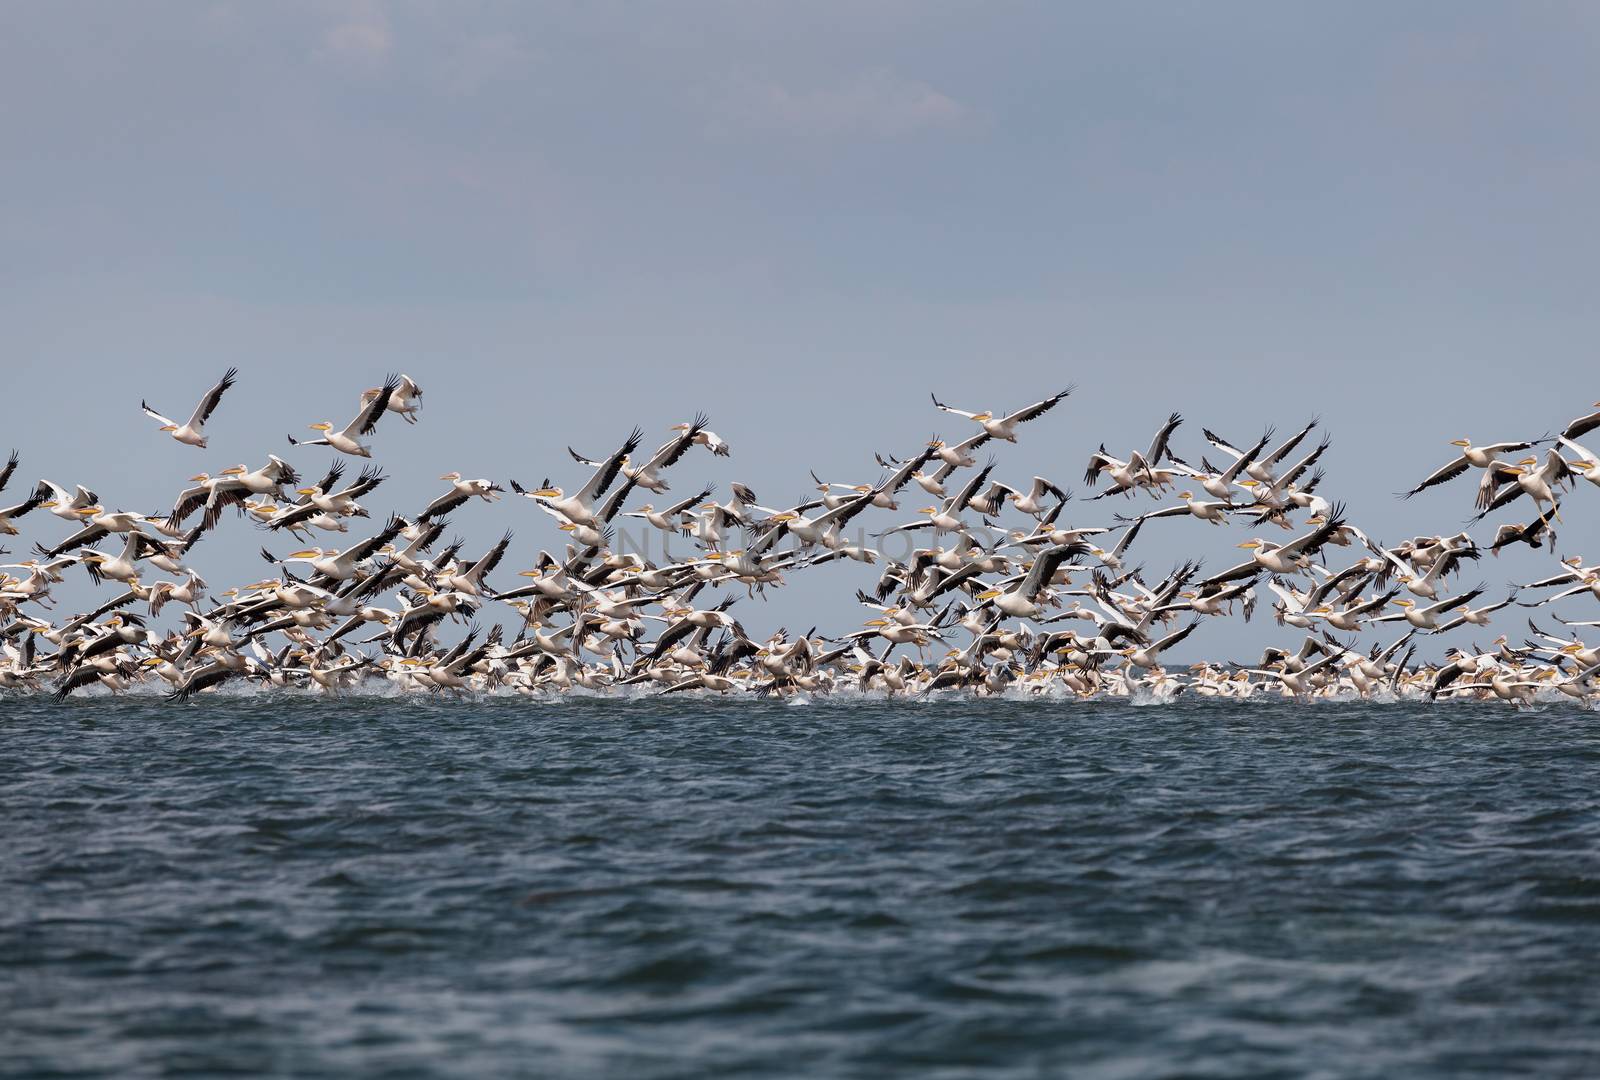 flock of pink pelicans fly over the water